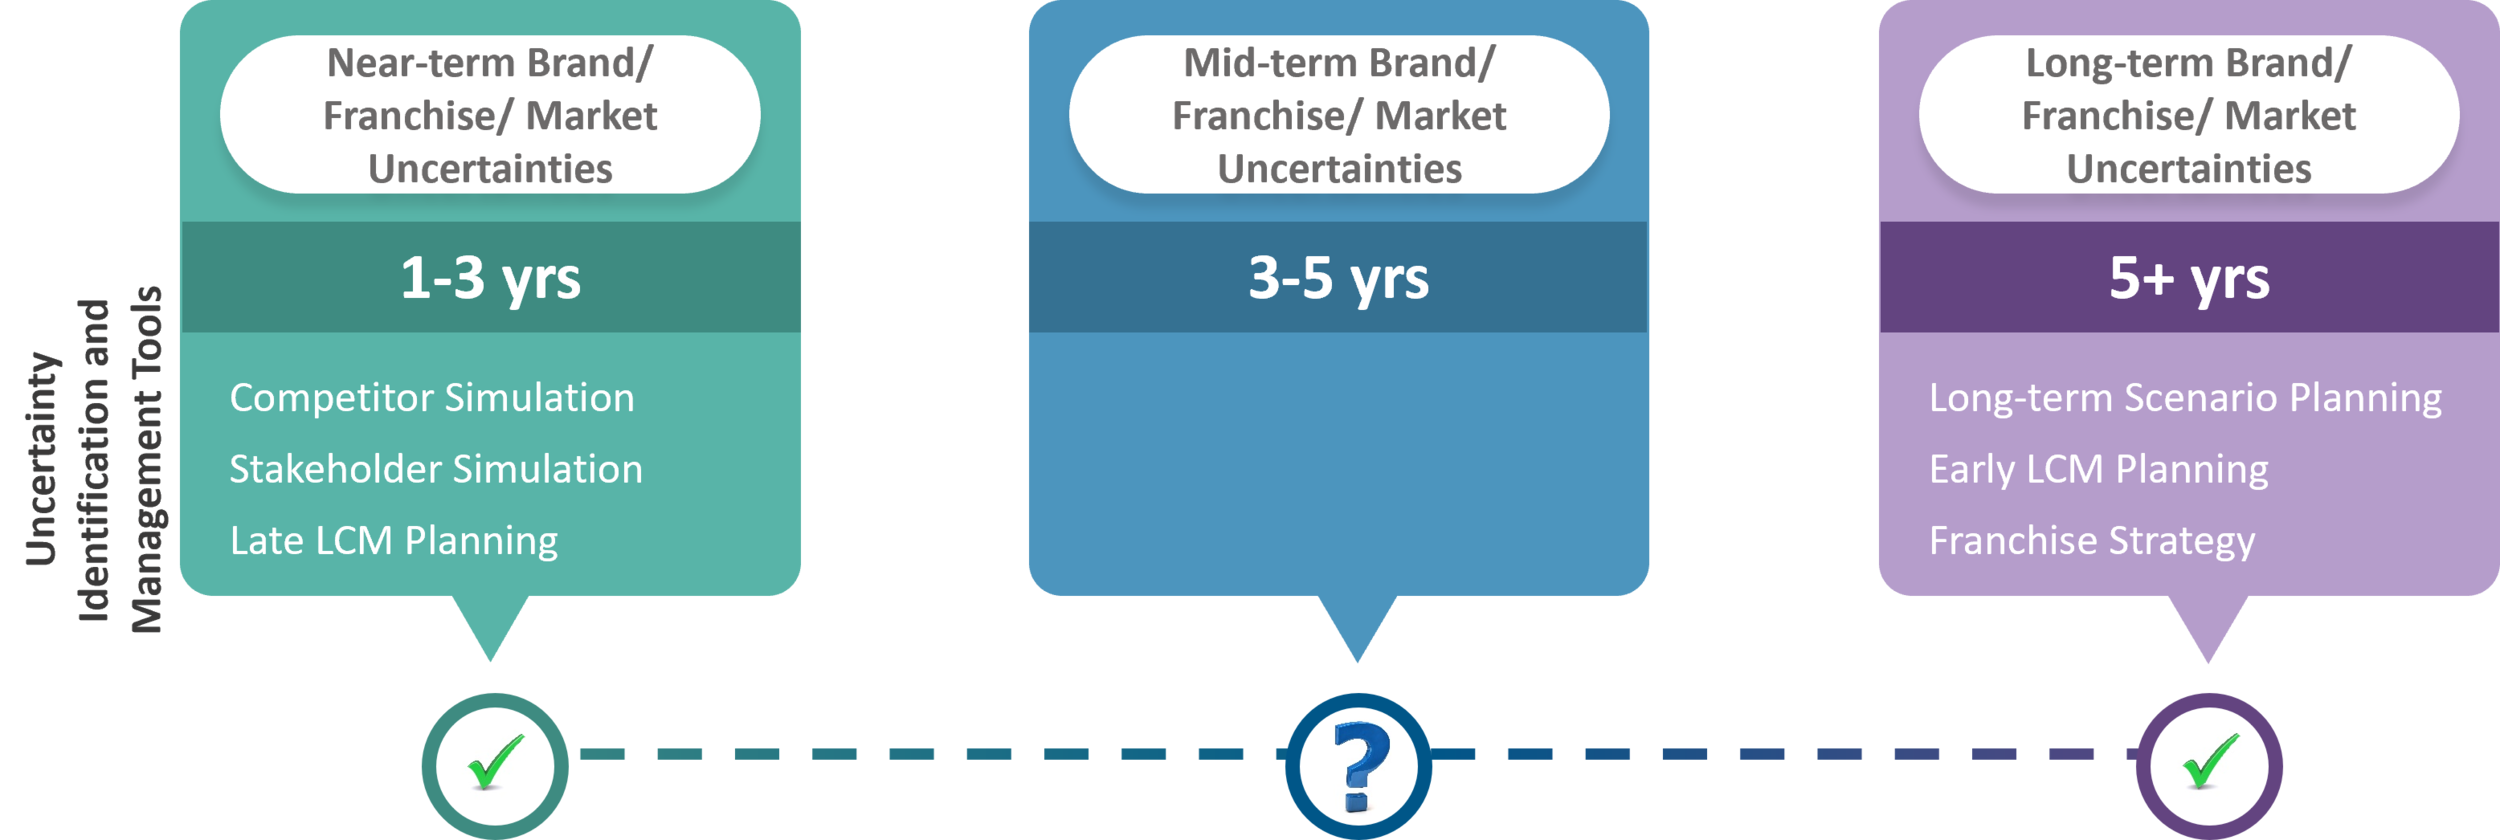 Managing Mid-Term Uncertainty